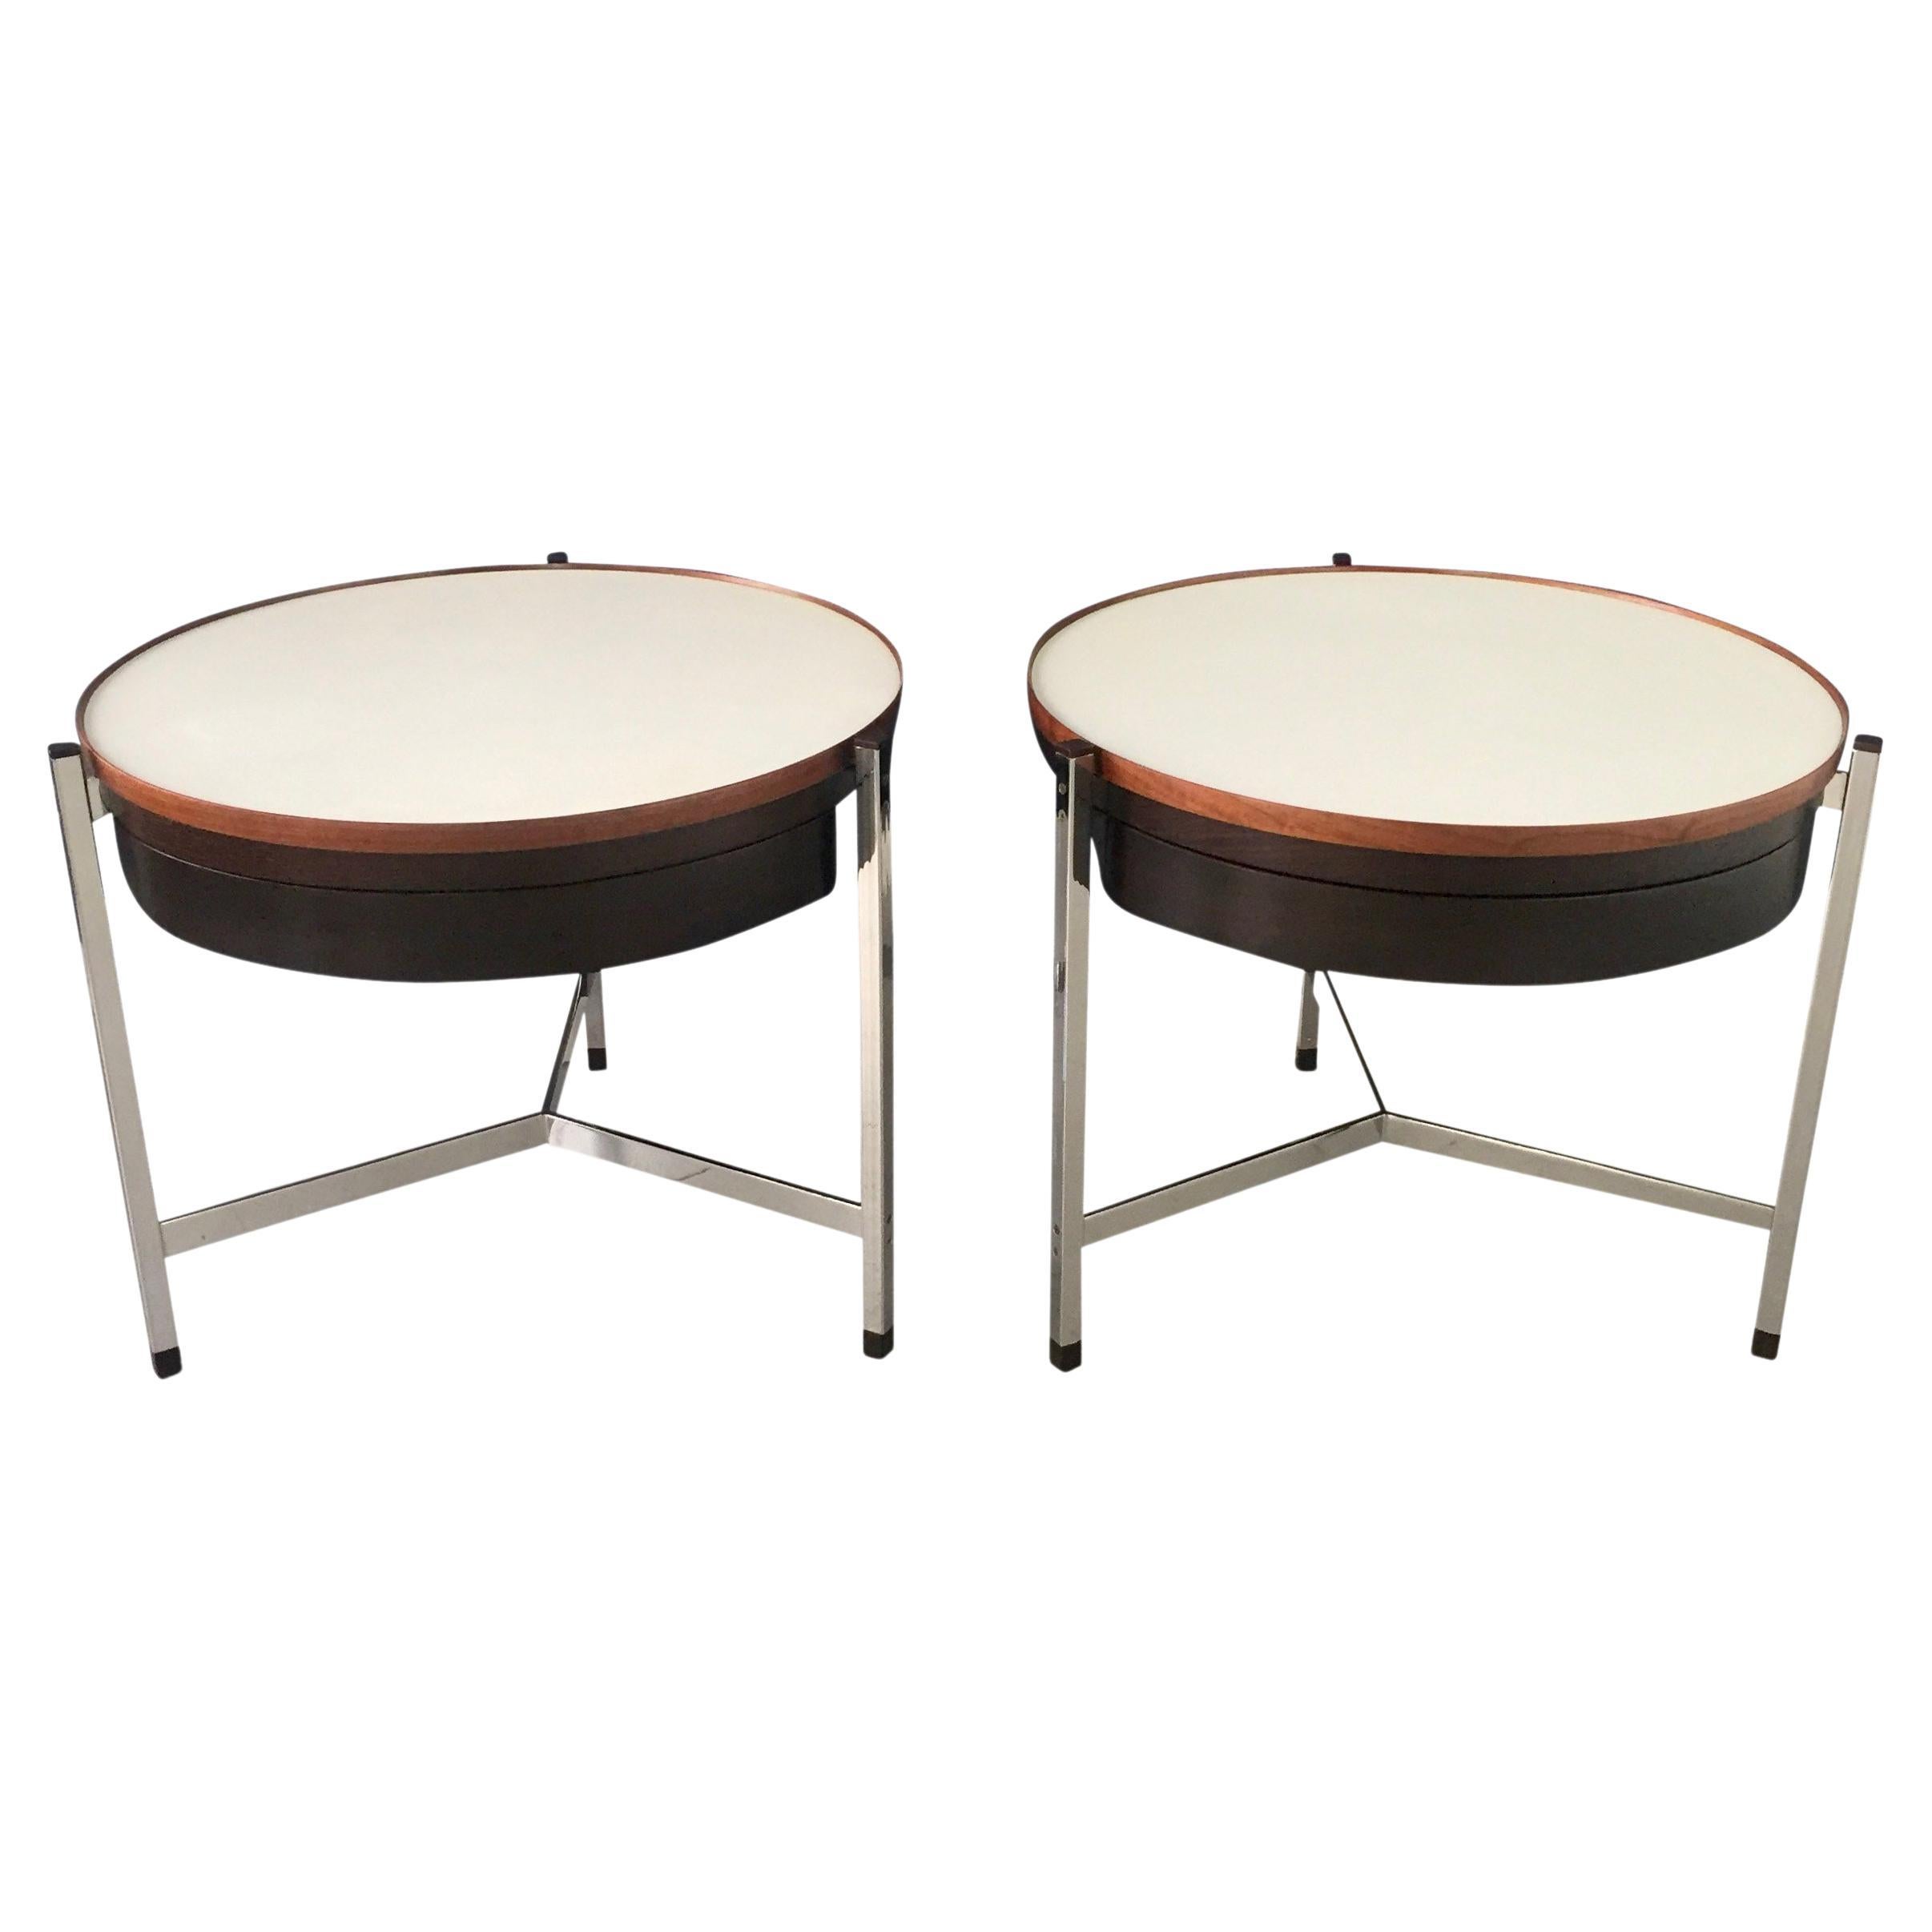 Dunbar Round Occasional Tables by Edward Wormley in Stainless Steel Mid-Century